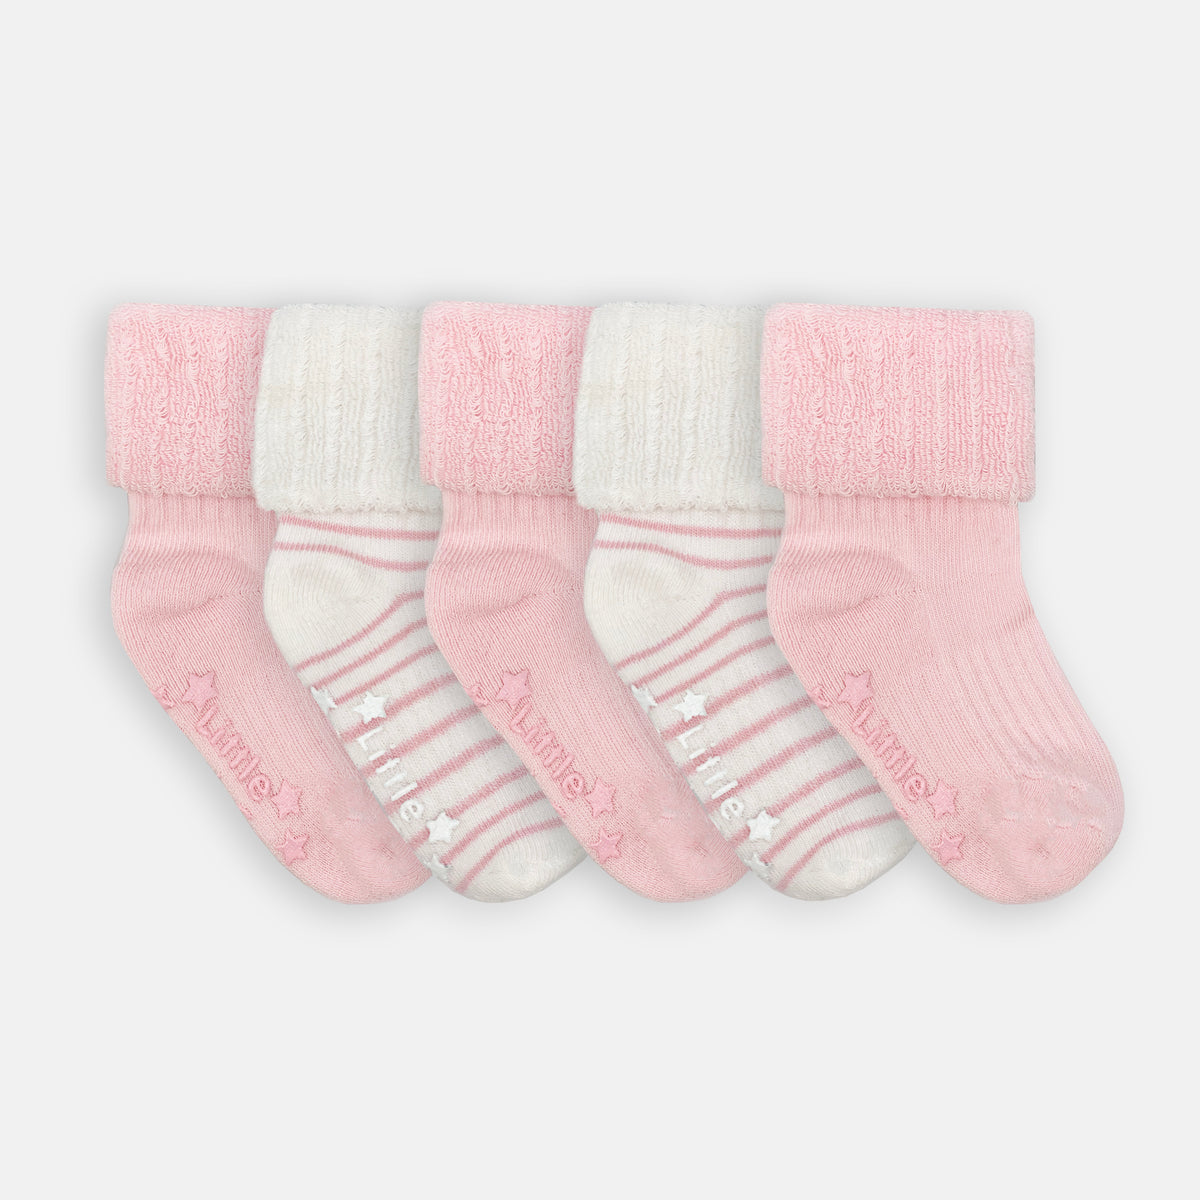 Cosy Stay-On Non-Slip Baby Socks - Pinks 5 Pack